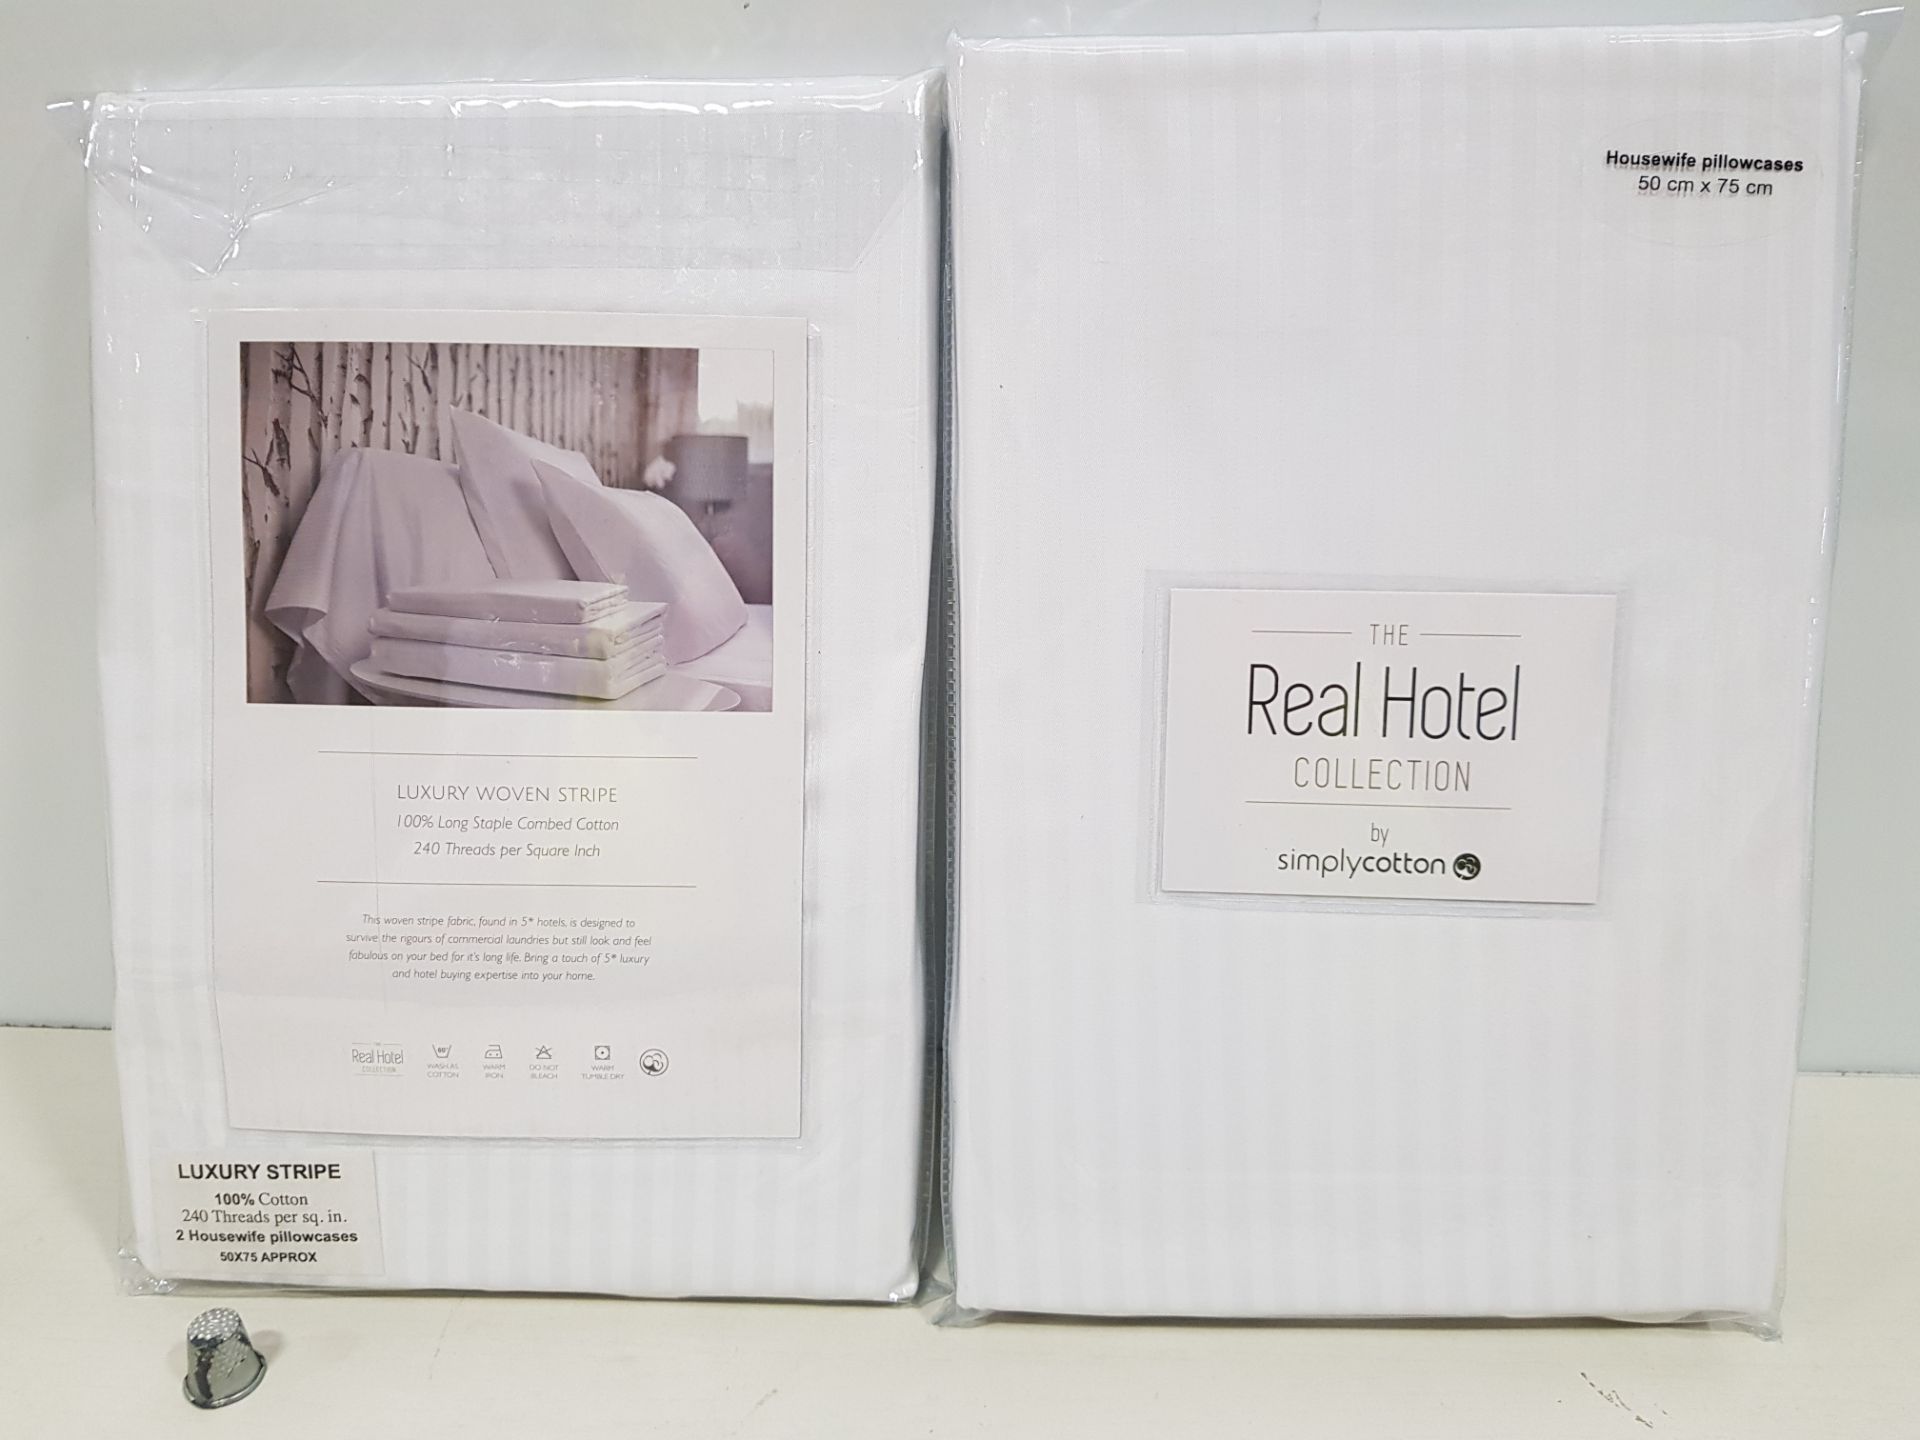 44 X BRAND NEW SIMPLY COTTON THE REAL HOTEL COLLECTION LUXURY WOVEN STRIPE WHITE 100% COTTON PAIR OF